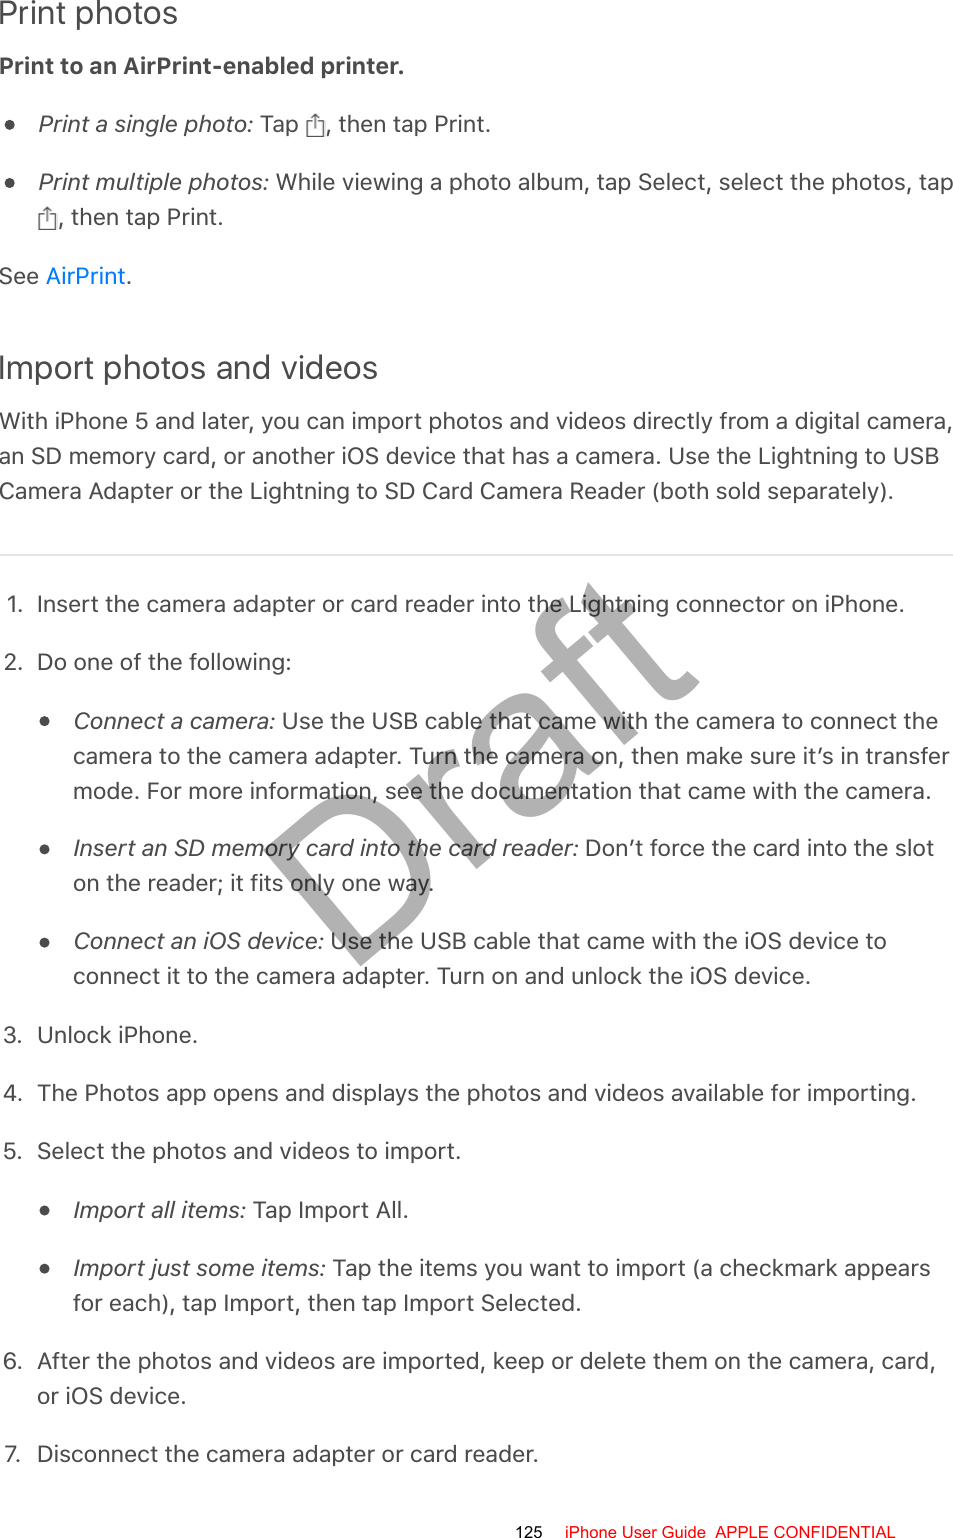 Print photosPrint to an AirPrint-enabled printer.Print a single photo: Tap  , then tap Print.Print multiple photos: While viewing a photo album, tap Select, select the photos, tap, then tap Print.See  .Import photos and videosWith iPhone 5 and later, you can import photos and videos directly from a digital camera,an SD memory card, or another iOS device that has a camera. Use the Lightning to USBCamera Adapter or the Lightning to SD Card Camera Reader (both sold separately).1. Insert the camera adapter or card reader into the Lightning connector on iPhone.2. Do one of the following:Connect a camera: Use the USB cable that came with the camera to connect thecamera to the camera adapter. Turn the camera on, then make sure it’s in transfermode. For more information, see the documentation that came with the camera.Insert an SD memory card into the card reader: Don’t force the card into the sloton the reader; it fits only one way.Connect an iOS device: Use the USB cable that came with the iOS device toconnect it to the camera adapter. Turn on and unlock the iOS device.3. Unlock iPhone.4. The Photos app opens and displays the photos and videos available for importing.5. Select the photos and videos to import.Import all items: Tap Import All.Import just some items: Tap the items you want to import (a checkmark appearsfor each), tap Import, then tap Import Selected.6. After the photos and videos are imported, keep or delete them on the camera, card,or iOS device.7.  Disconnect the camera adapter or card reader.AirPrint125 iPhone User Guide  APPLE CONFIDENTIALDraft